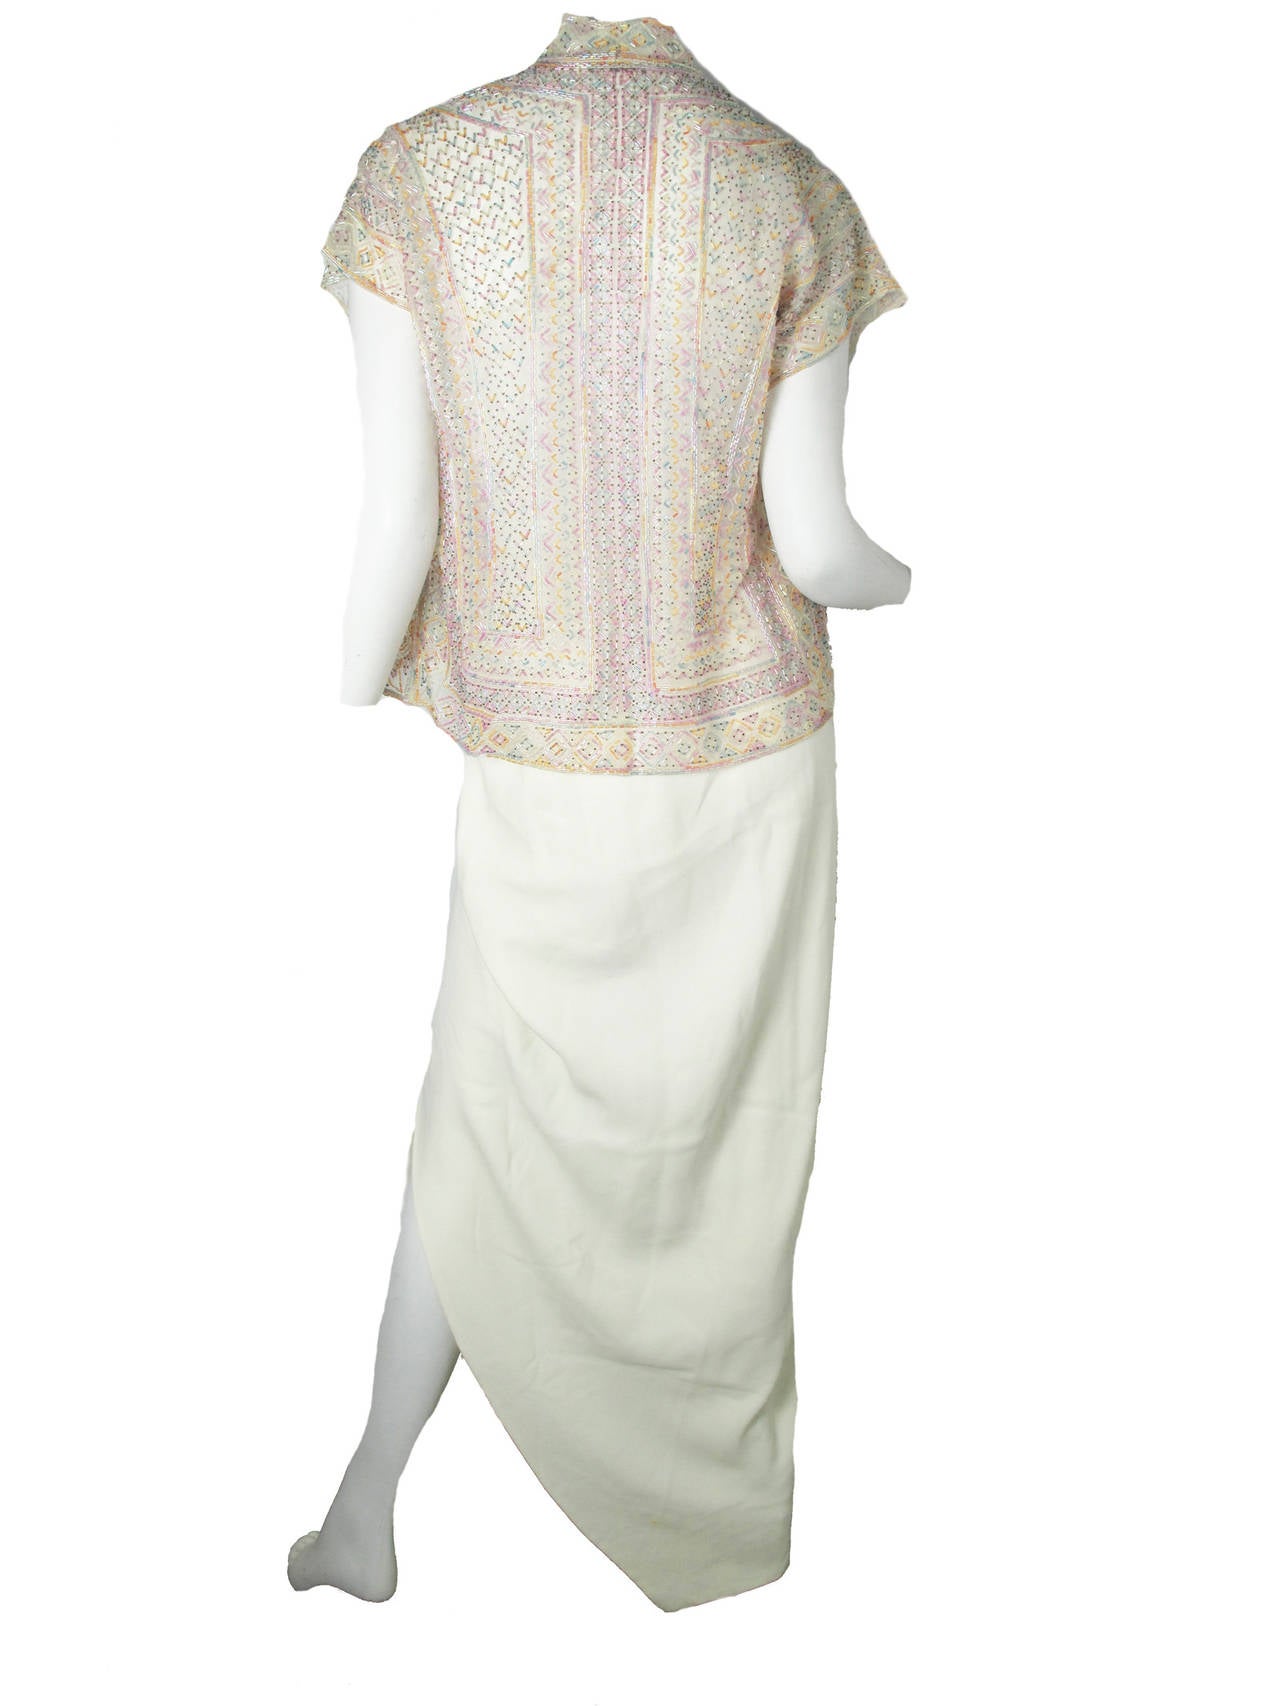 Late 70s - Early 80s Halston Sheer Bugle Beaded Top & Skirt with Side Slit.  Wrap Jersey Skirt : 25